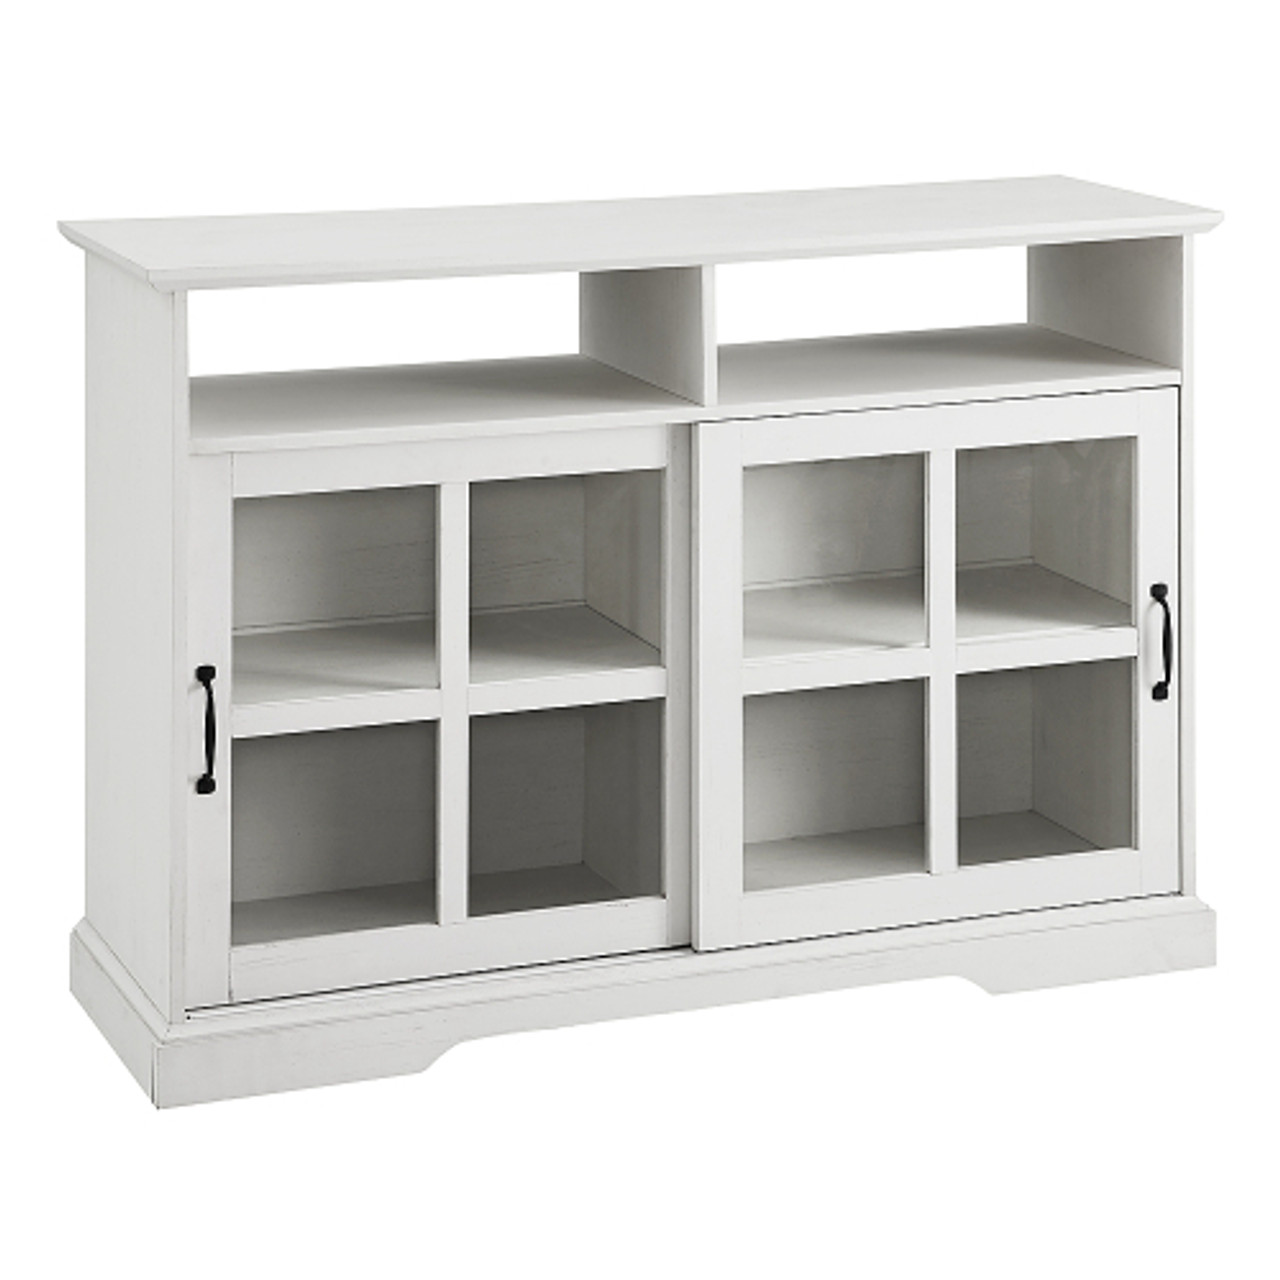 Walker Edison - Farmhouse Sliding Glass Door Storage Console for TVs up to 55" - Brushed White